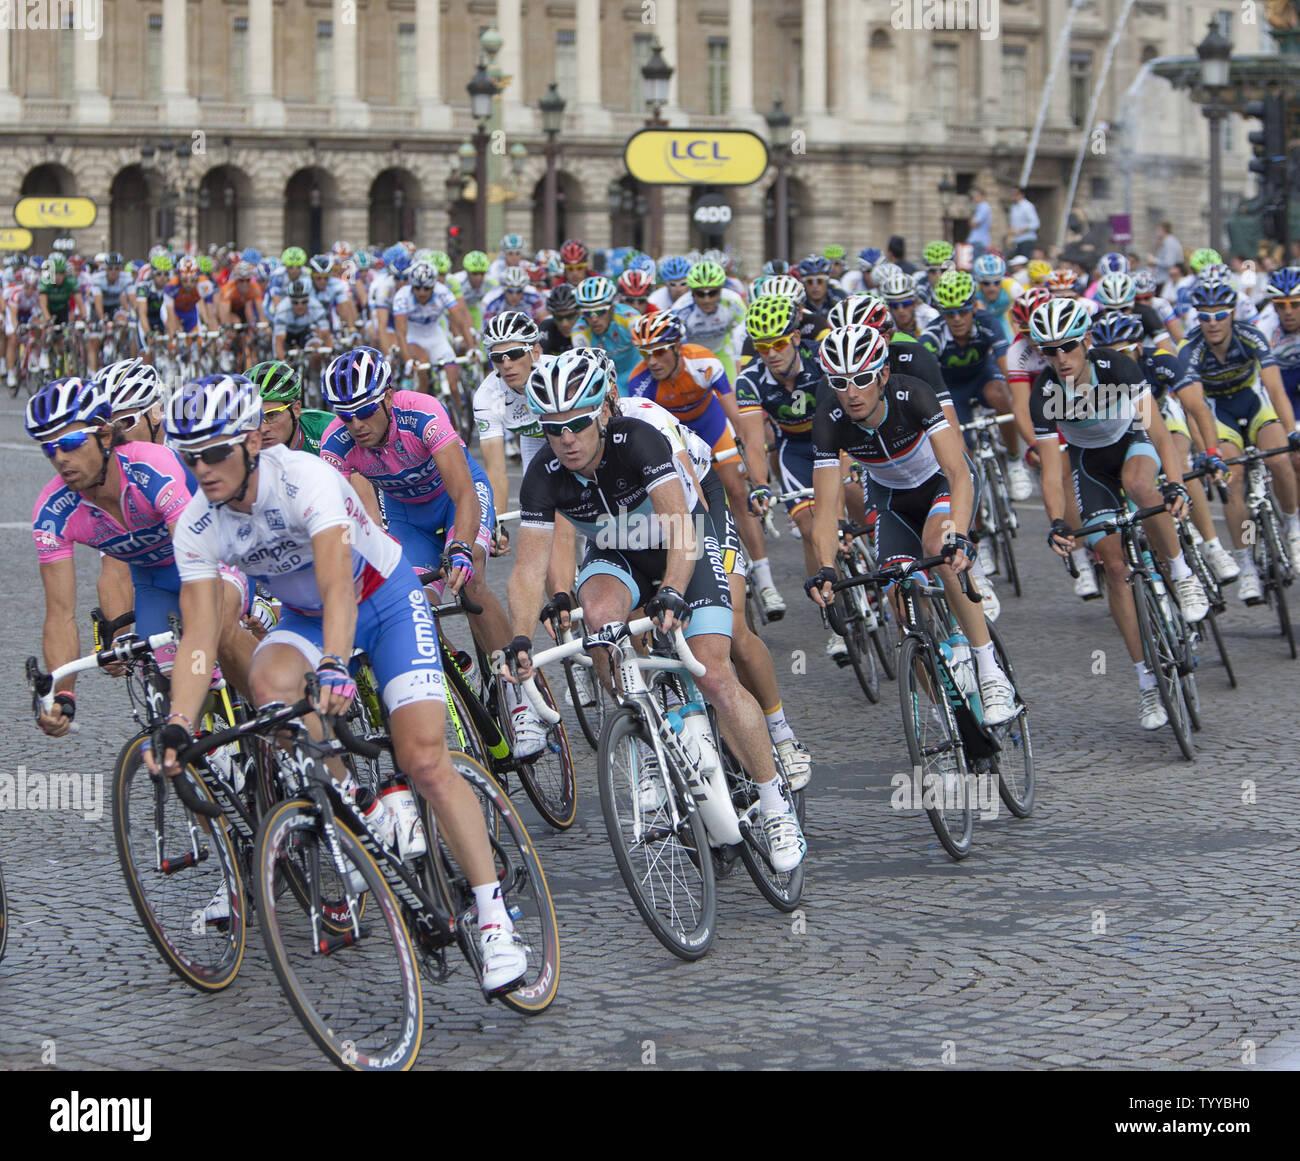 Competitors ride through the Place de la Concorde during the final stage of the Tour de France in Paris on July 24, 2011.  Cadel Evans won the event for the first time, becoming the first Australian to do so.   UPI/David Silpa Stock Photo